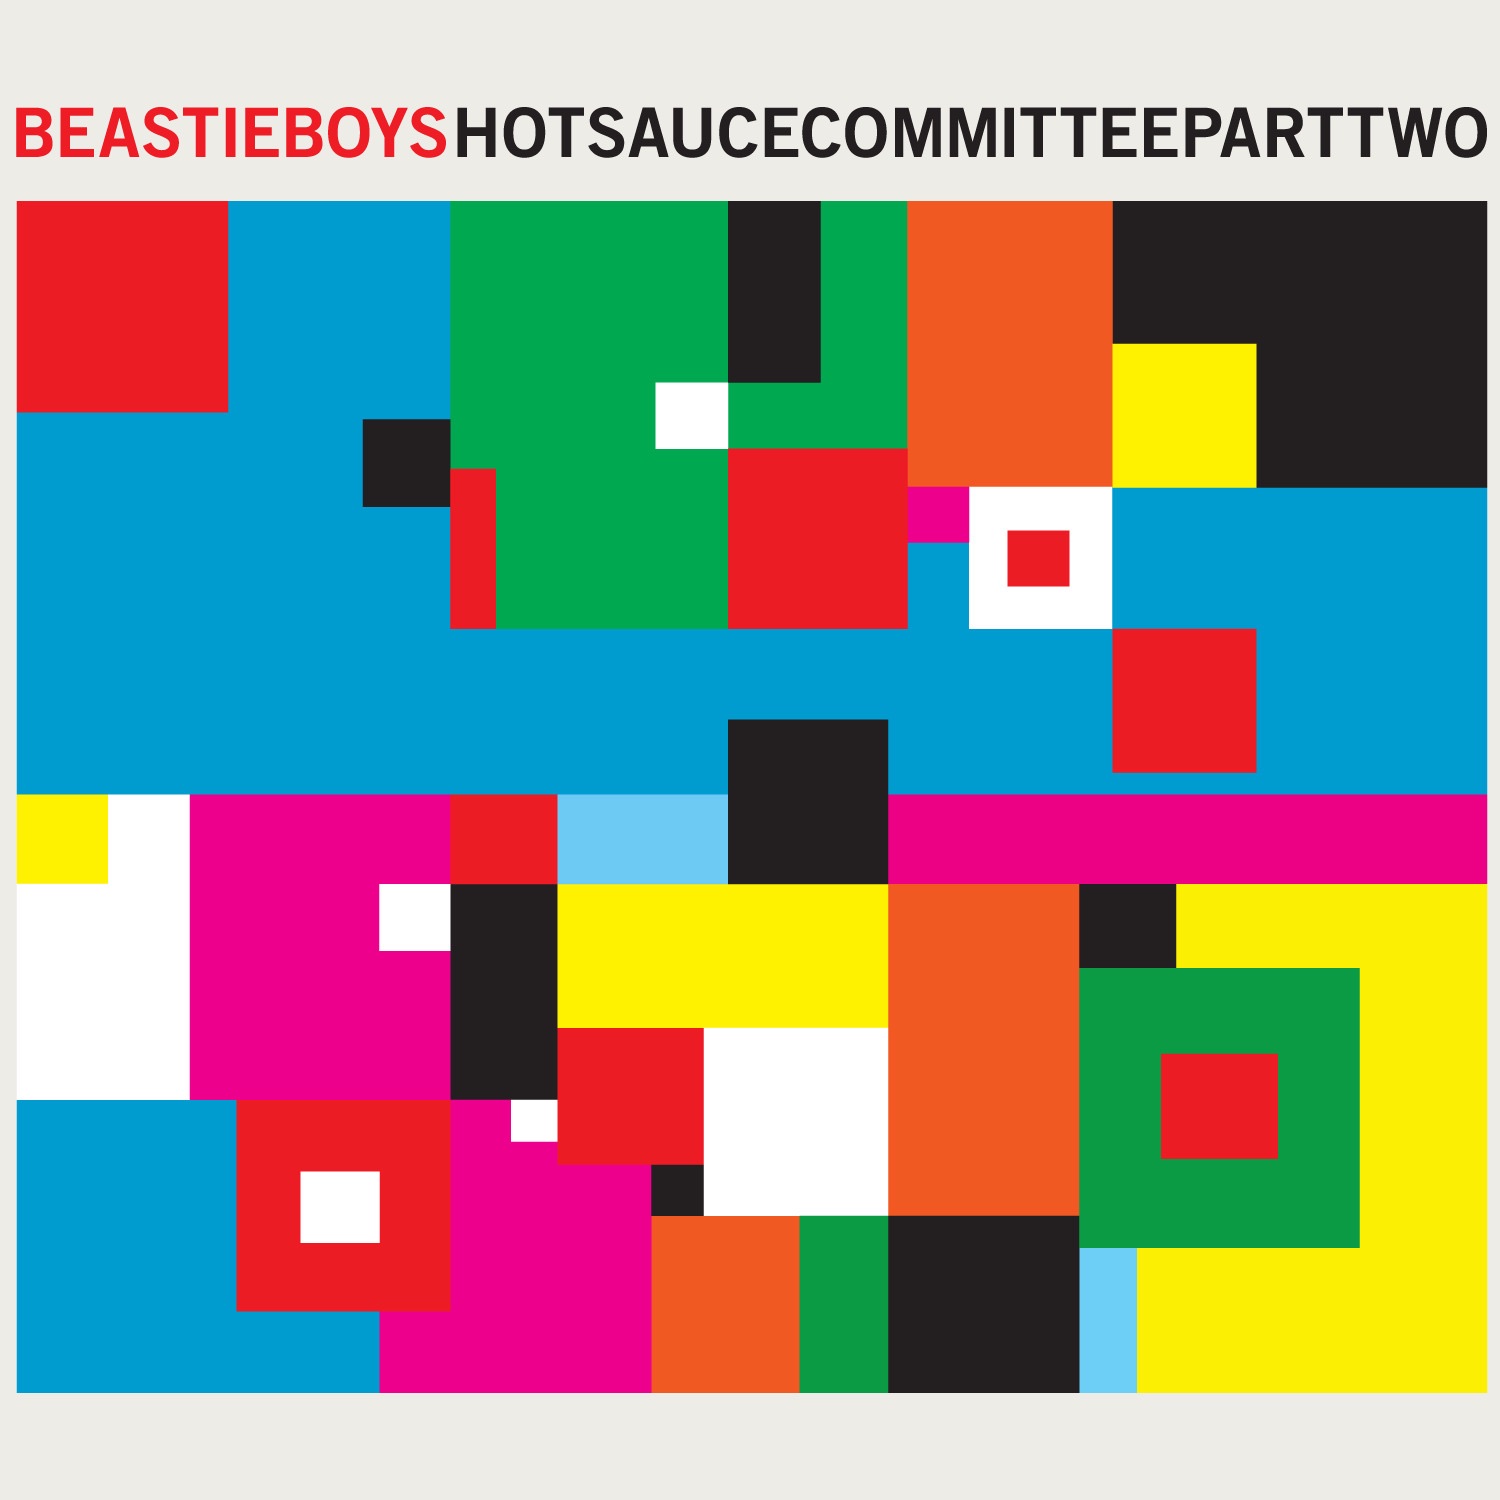 Beastie Boys Hot Sauce Committee Part Two cover artwork